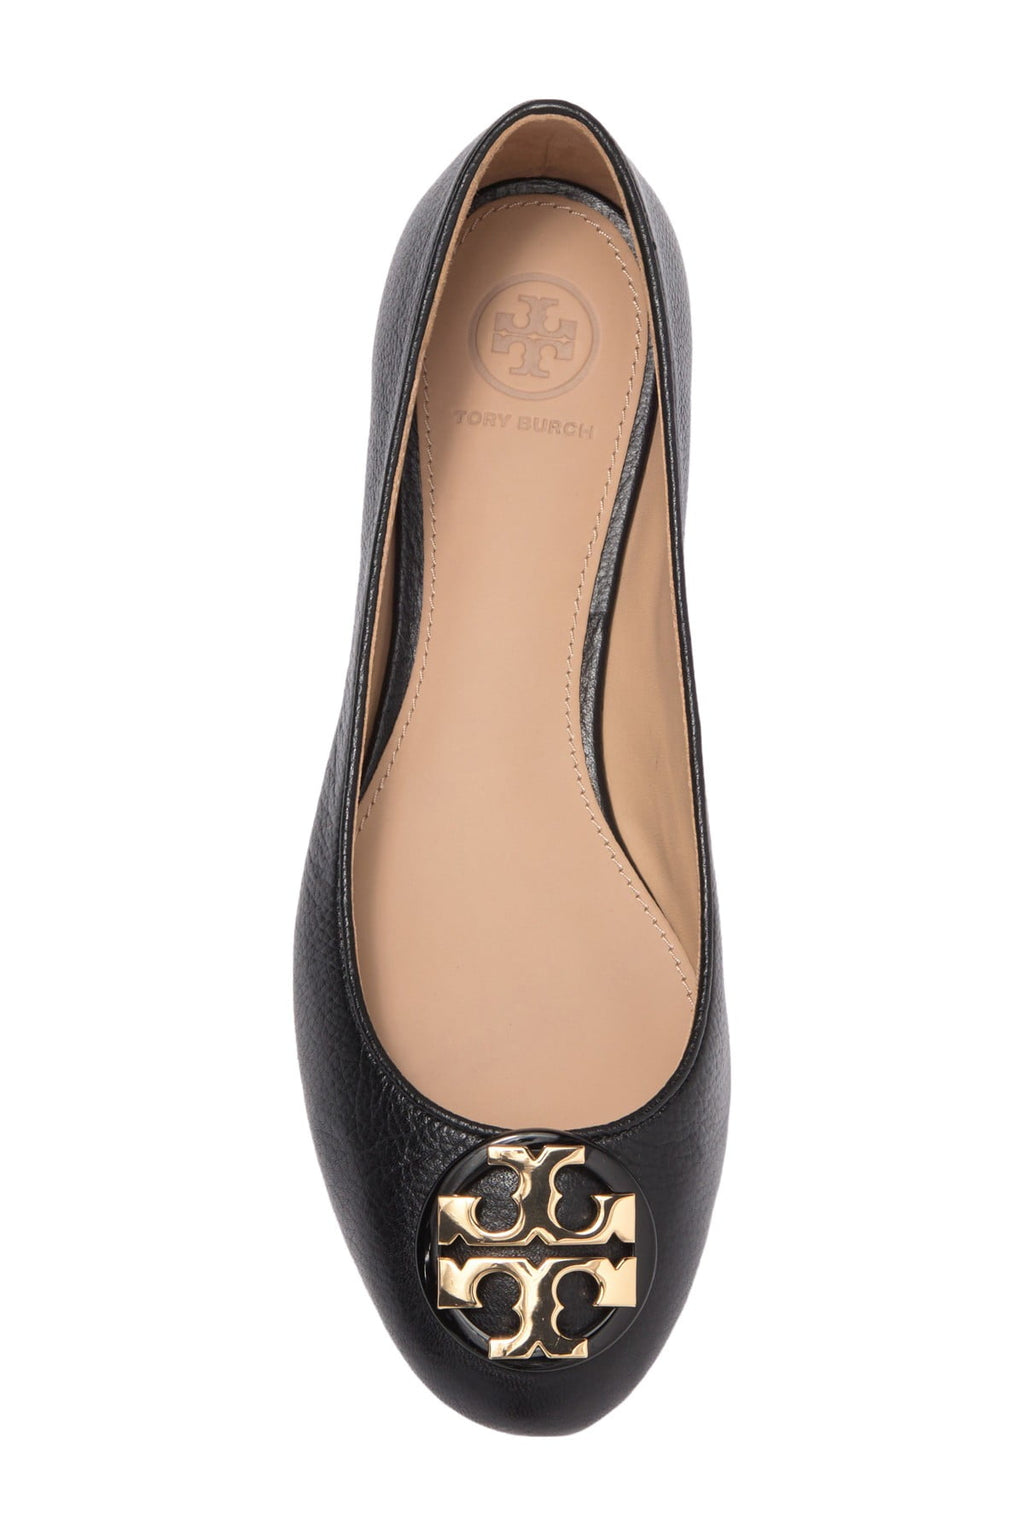 Tory Burch 43394 - Claire Ballet Flat in Black